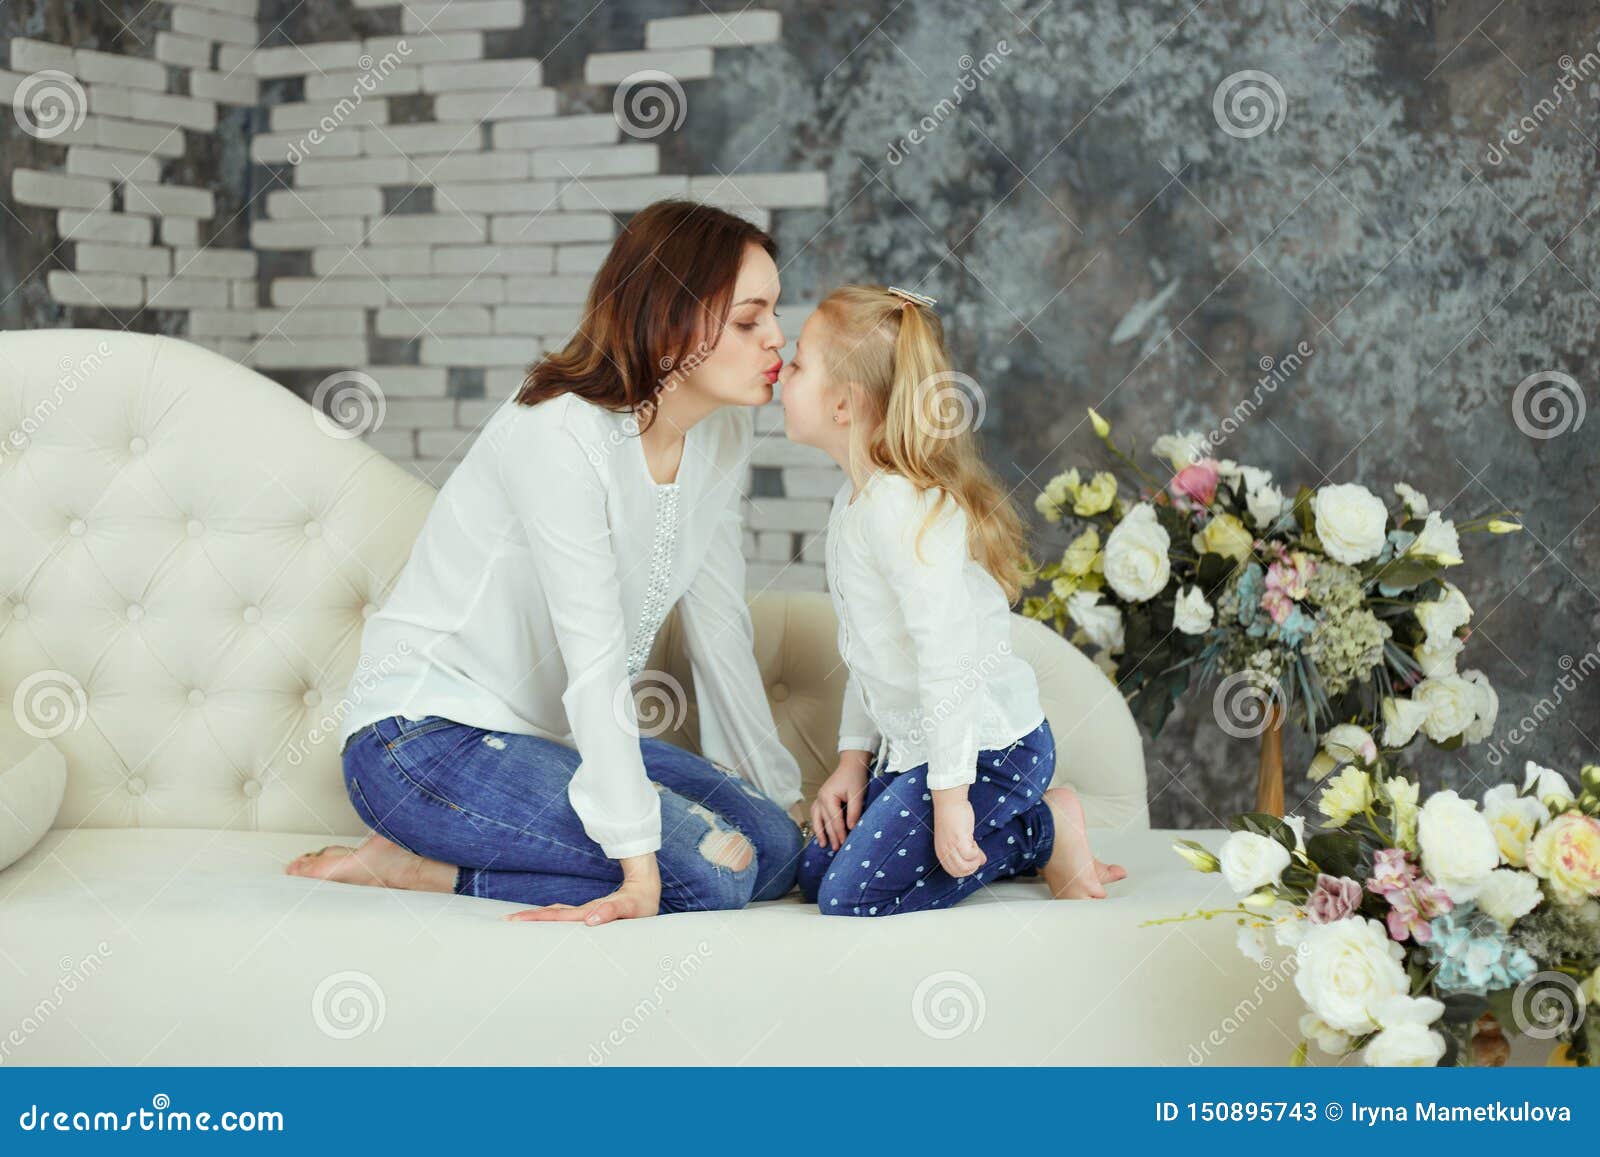 Tender Kiss Mother And Daughter Stock Image Image Of Love Care 150895743